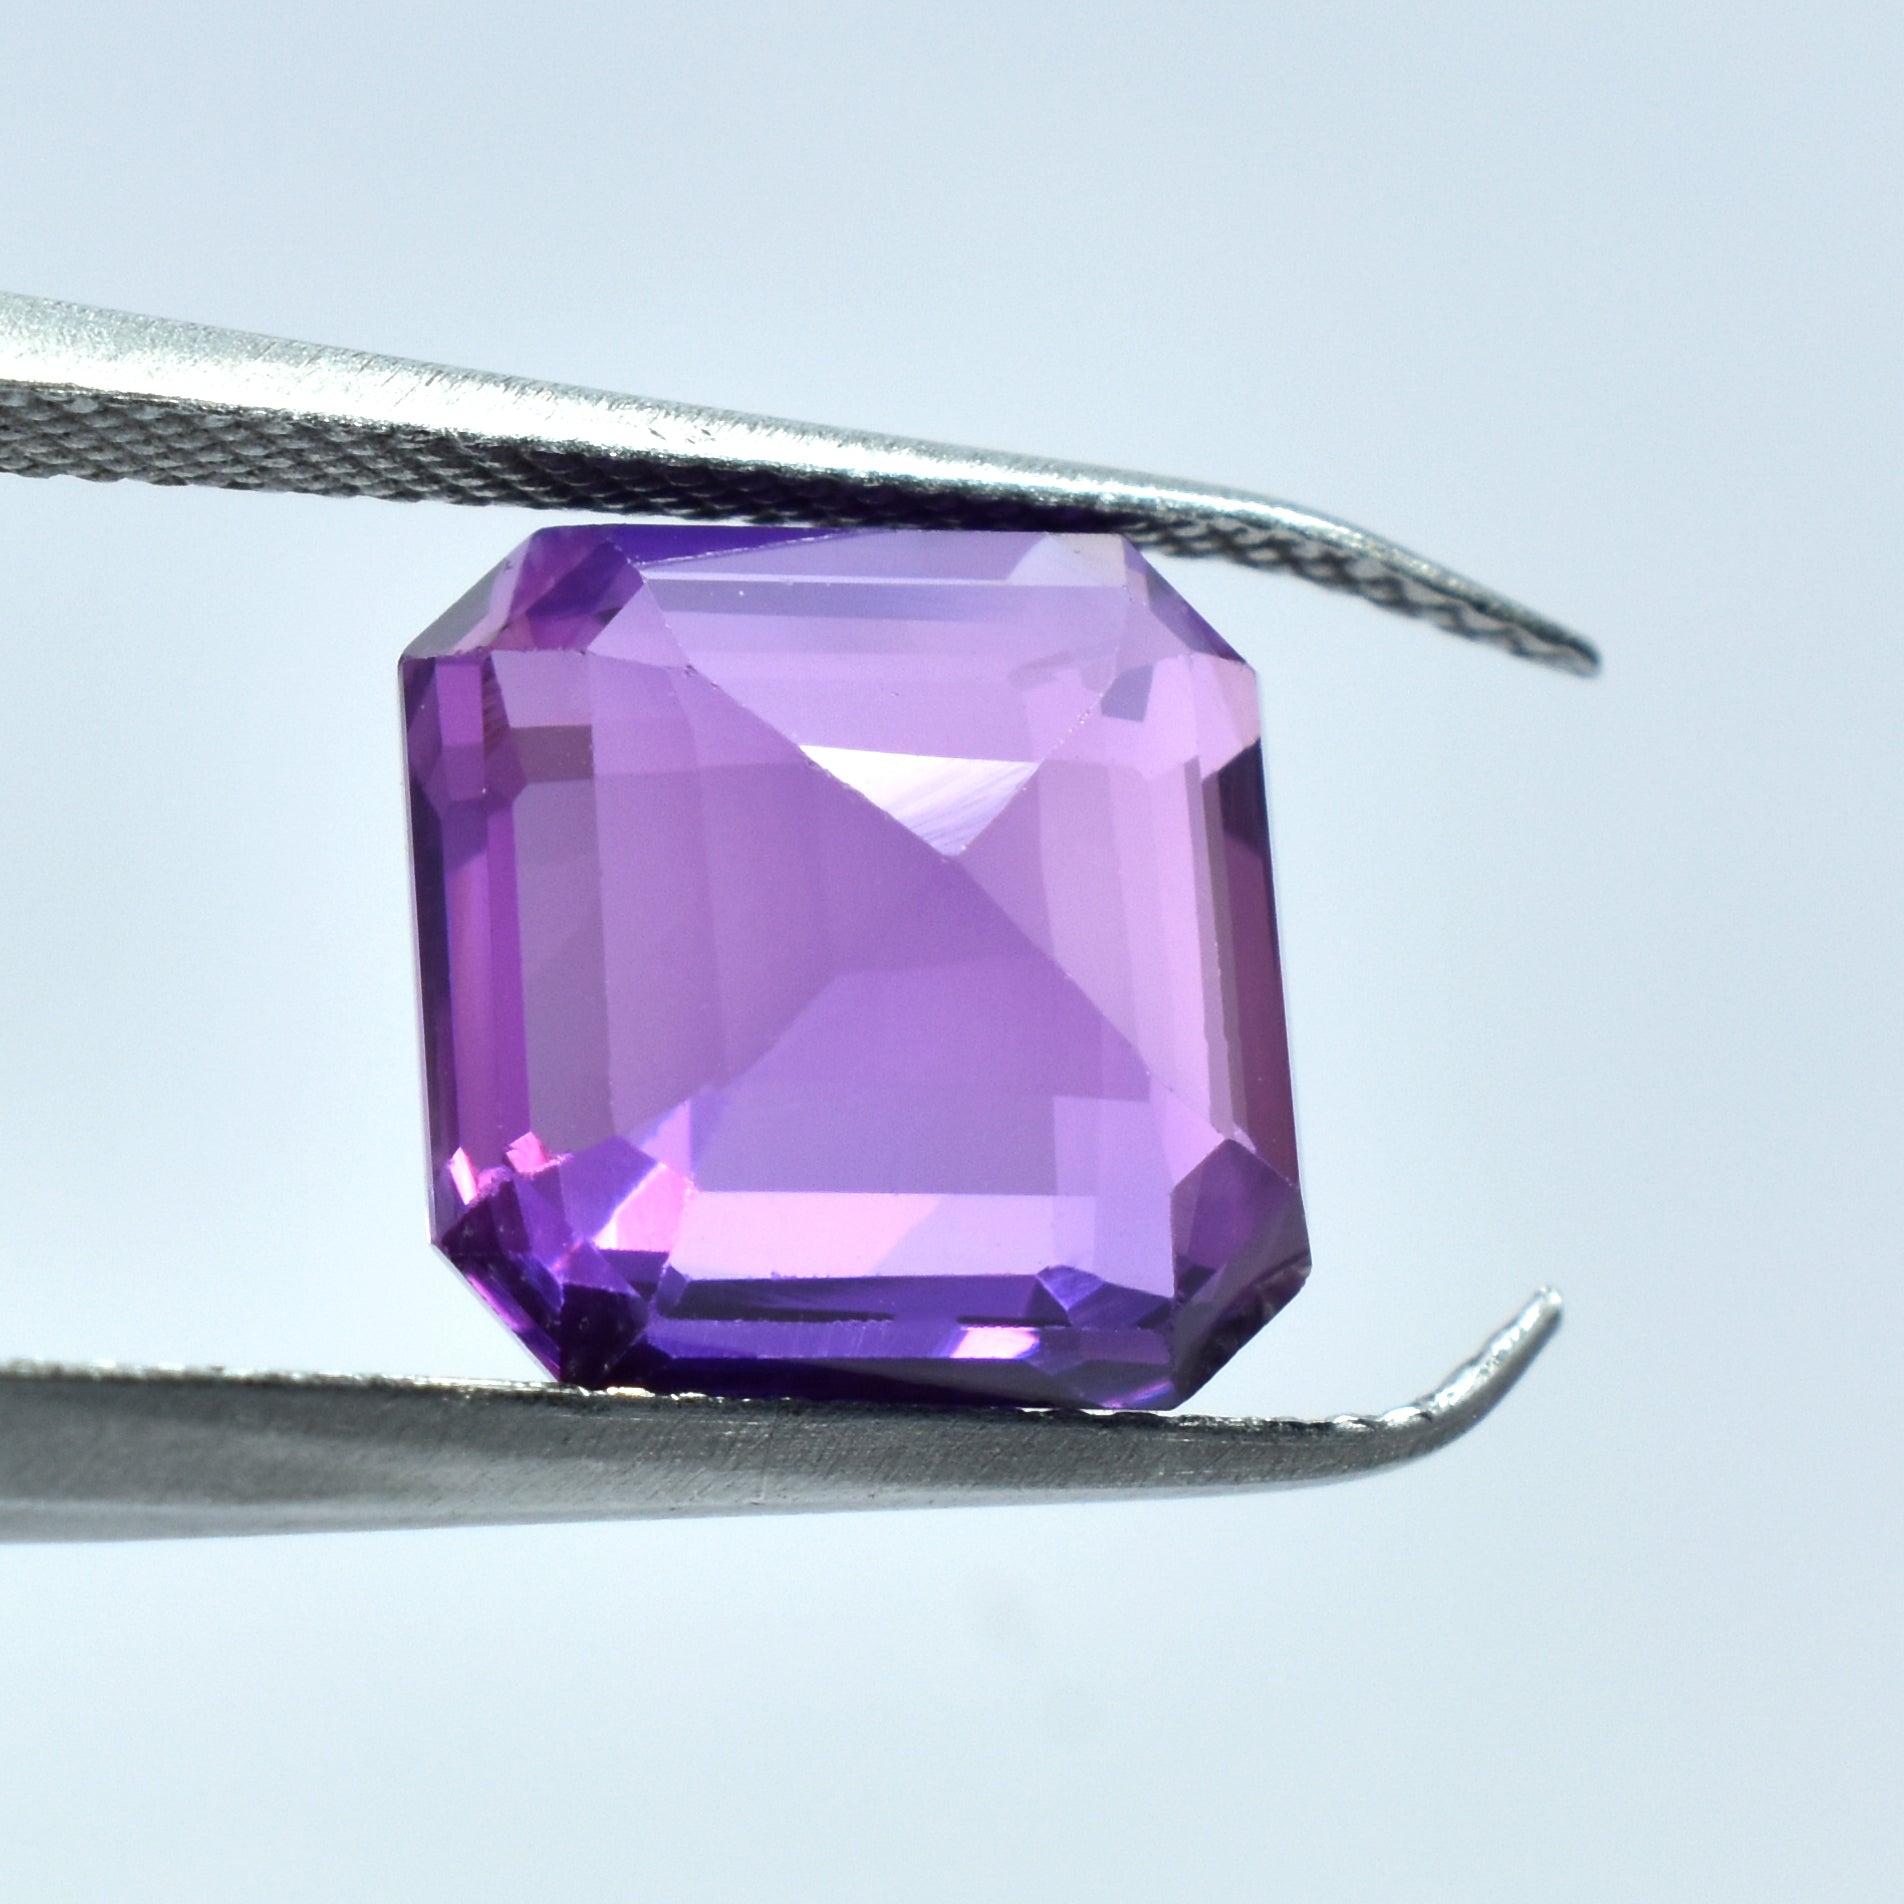 Square Shape Sapphire Gem For Rings 9.45 Carat Color Change Sapphire Natural Purple Color Certified Loose Gemstone | Free Delivery Free Gift | Best For Durability Or Affordability